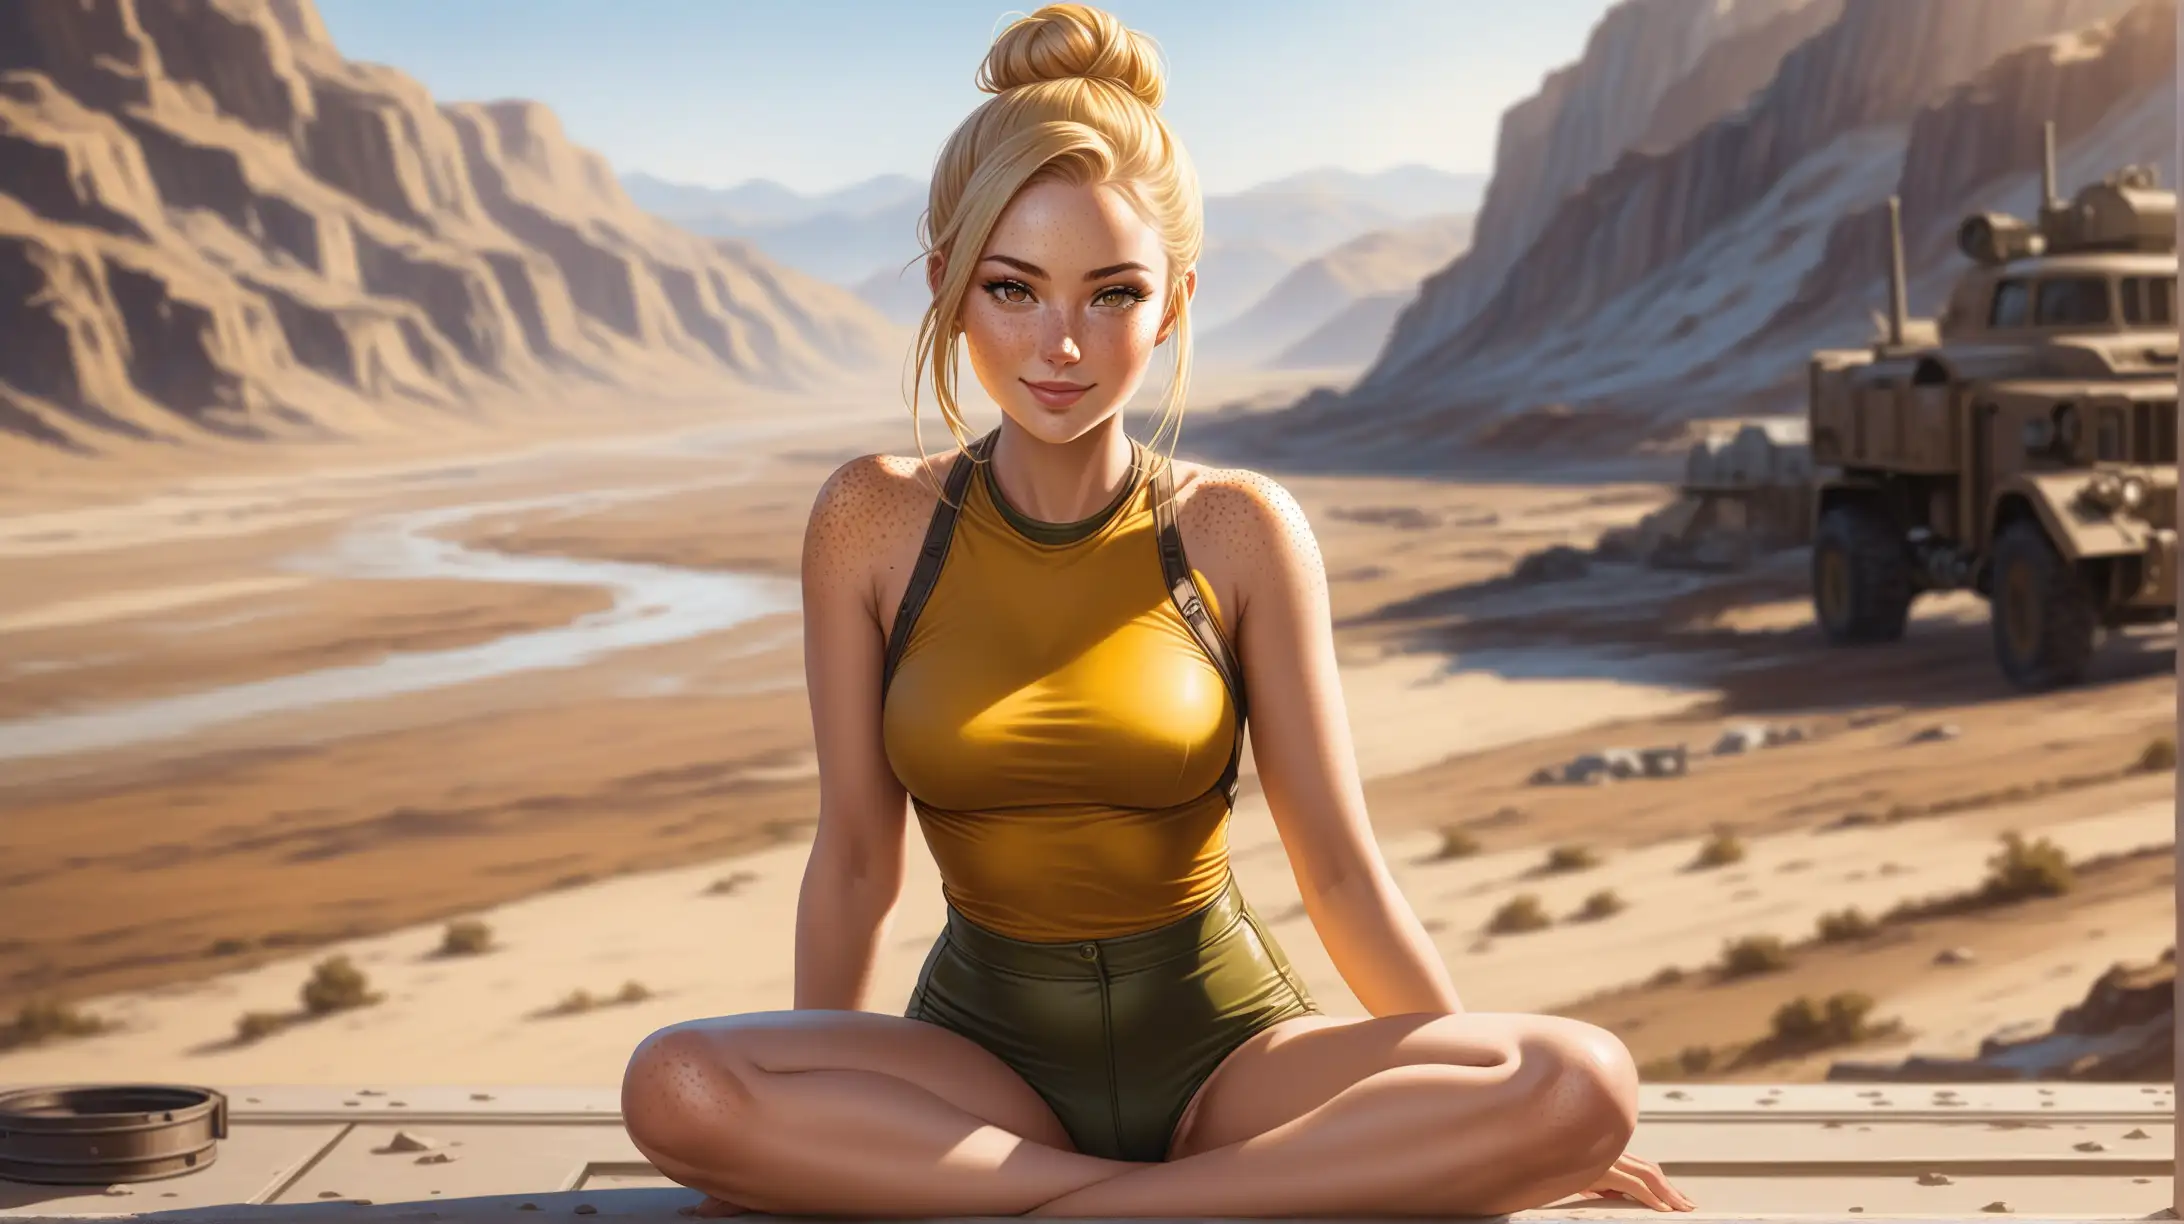 Seductive Blonde Woman Outdoors with FalloutInspired Outfit